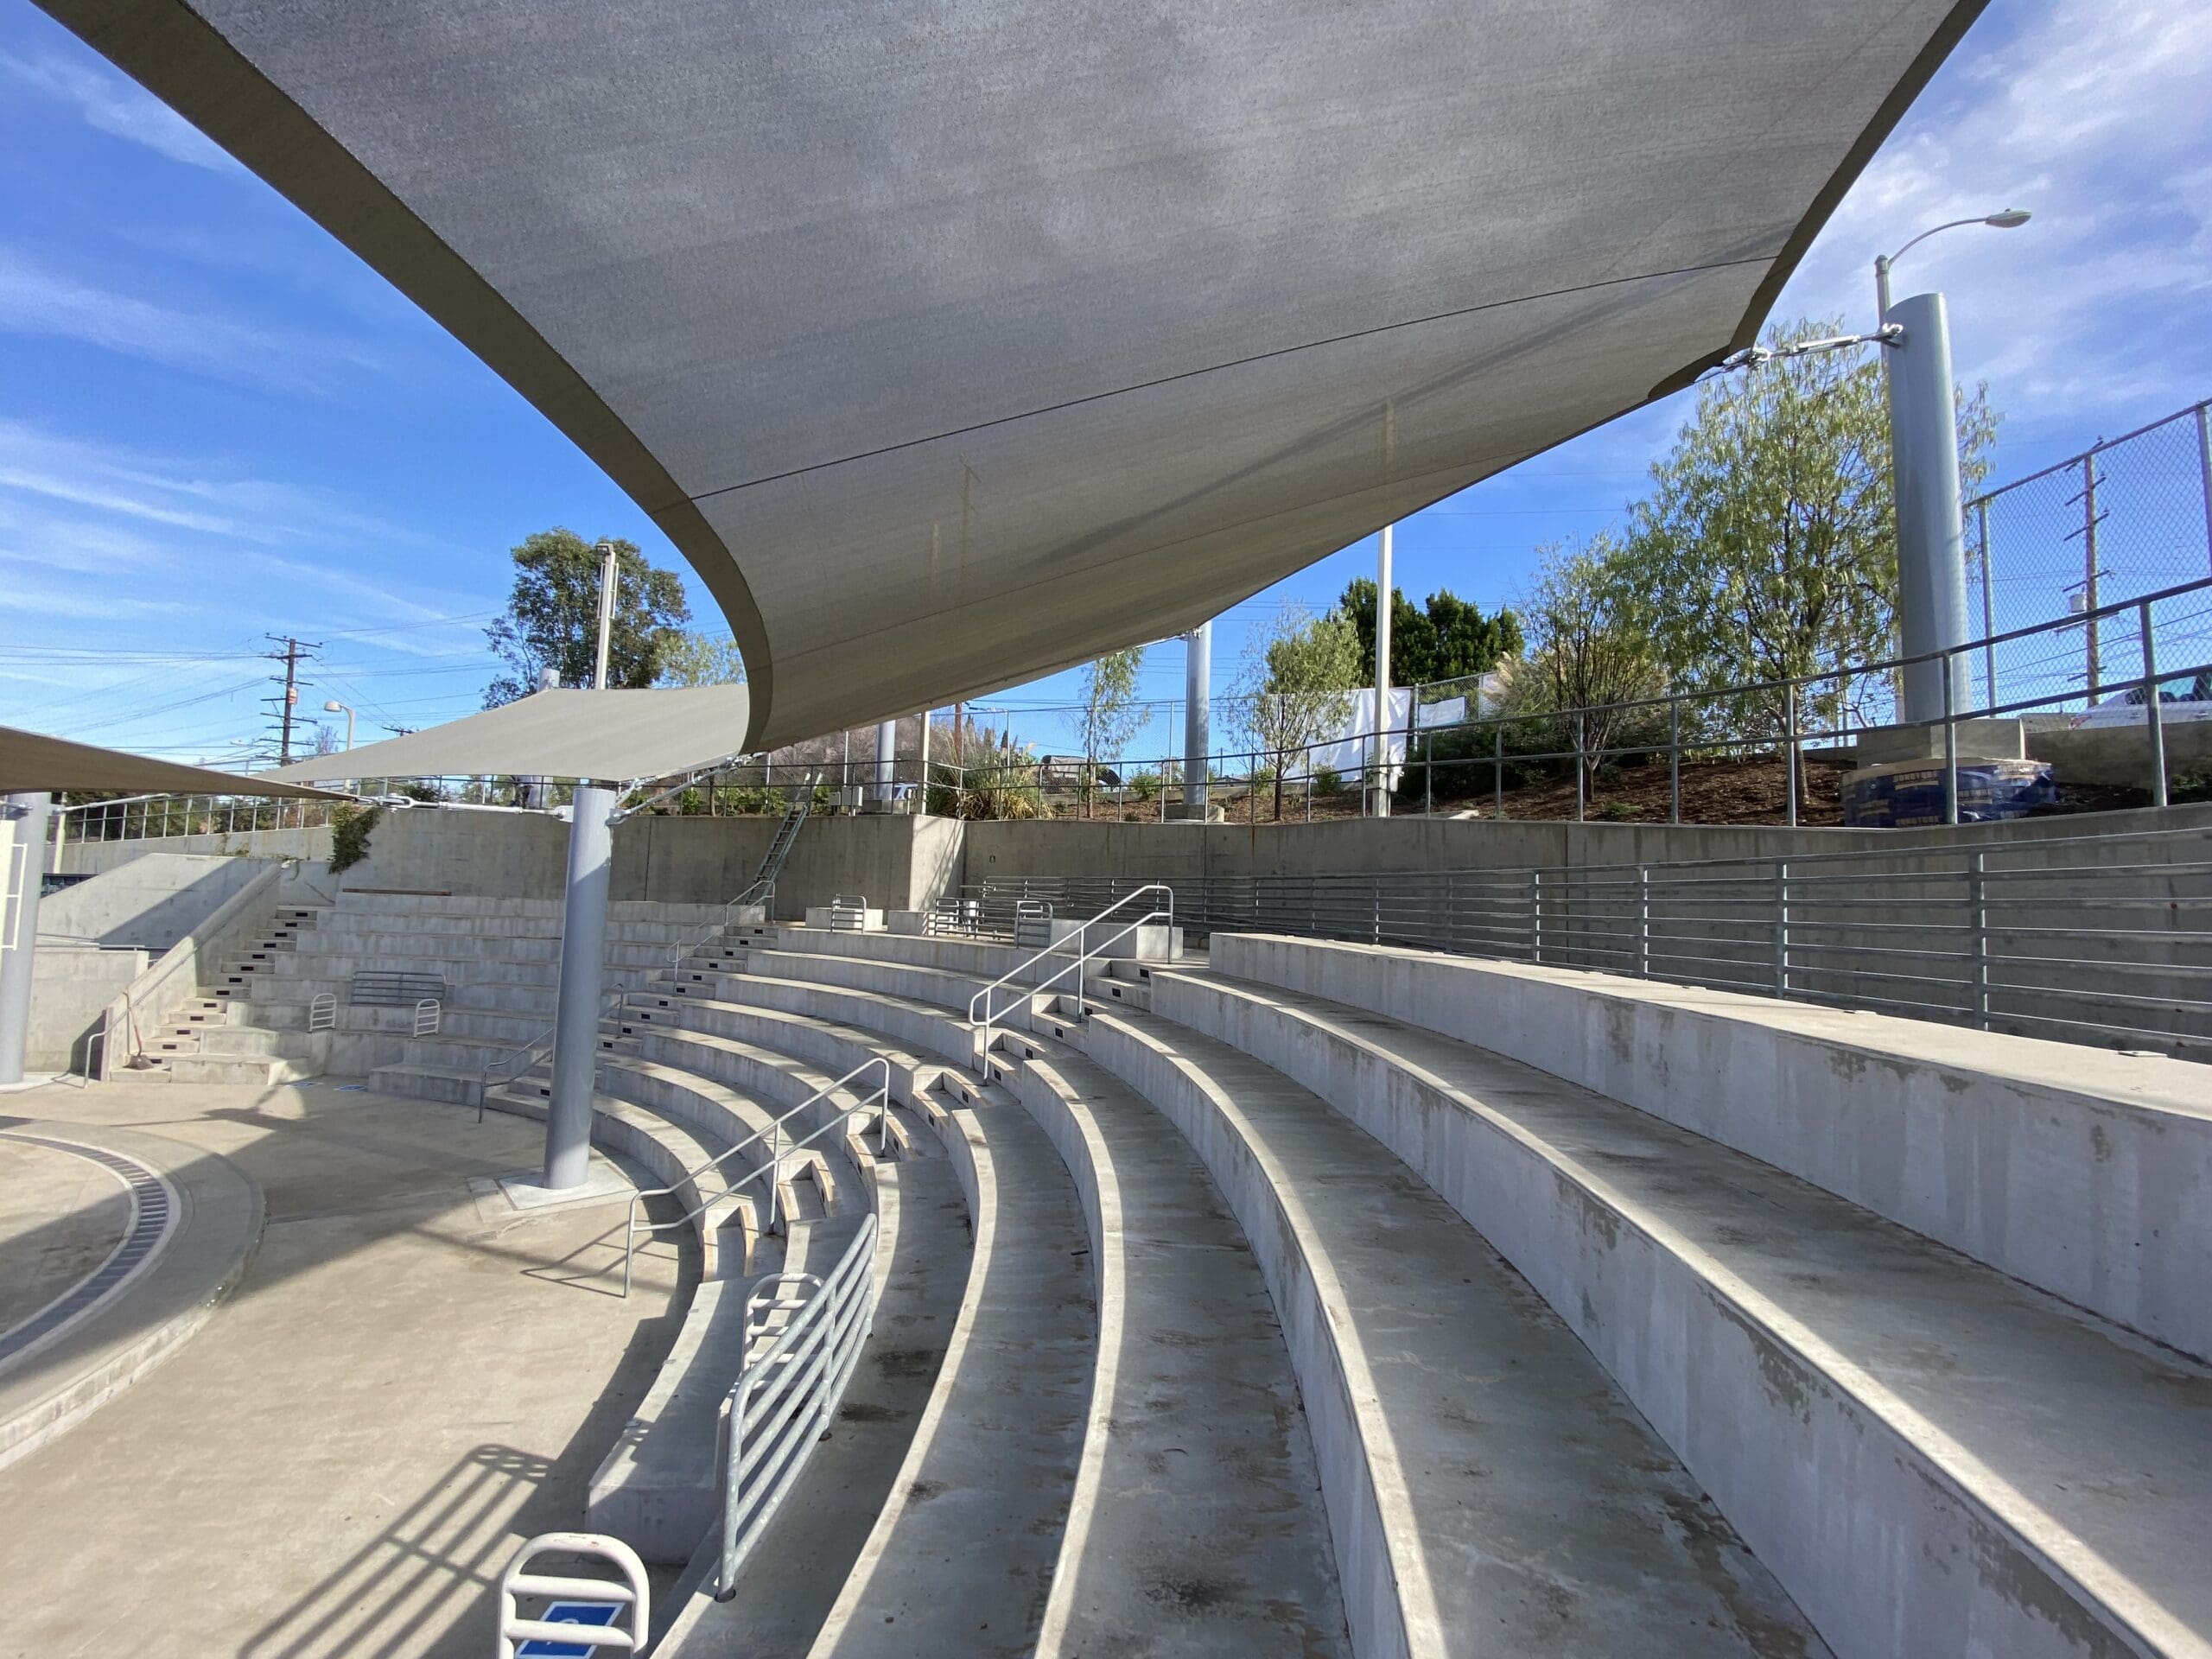 concrete seating at amphitheater covered by shades